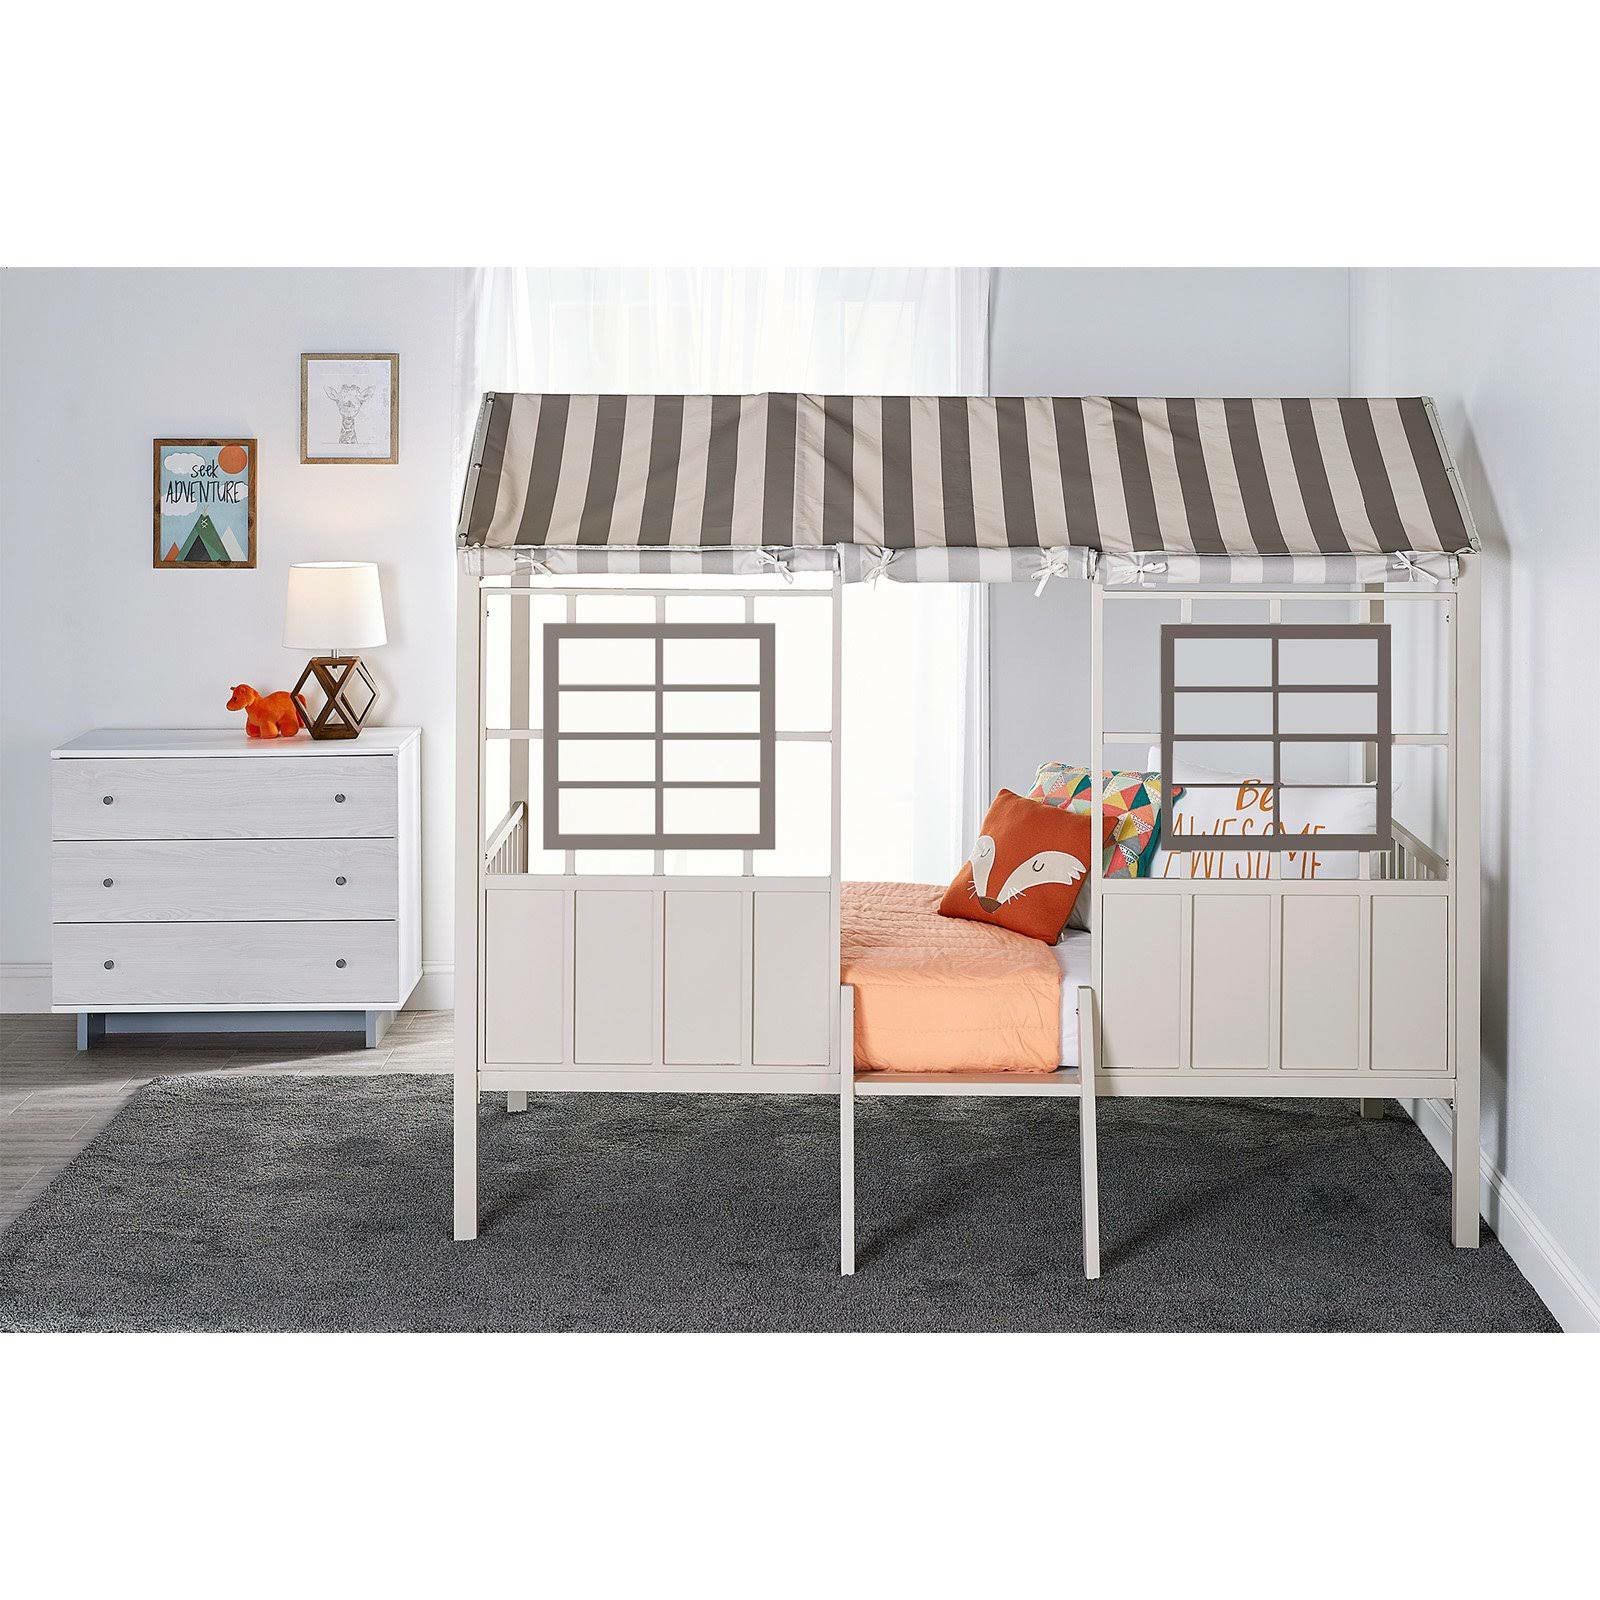 Rowan Valley Forest Loft Bed, Grey/Taupe, Twin